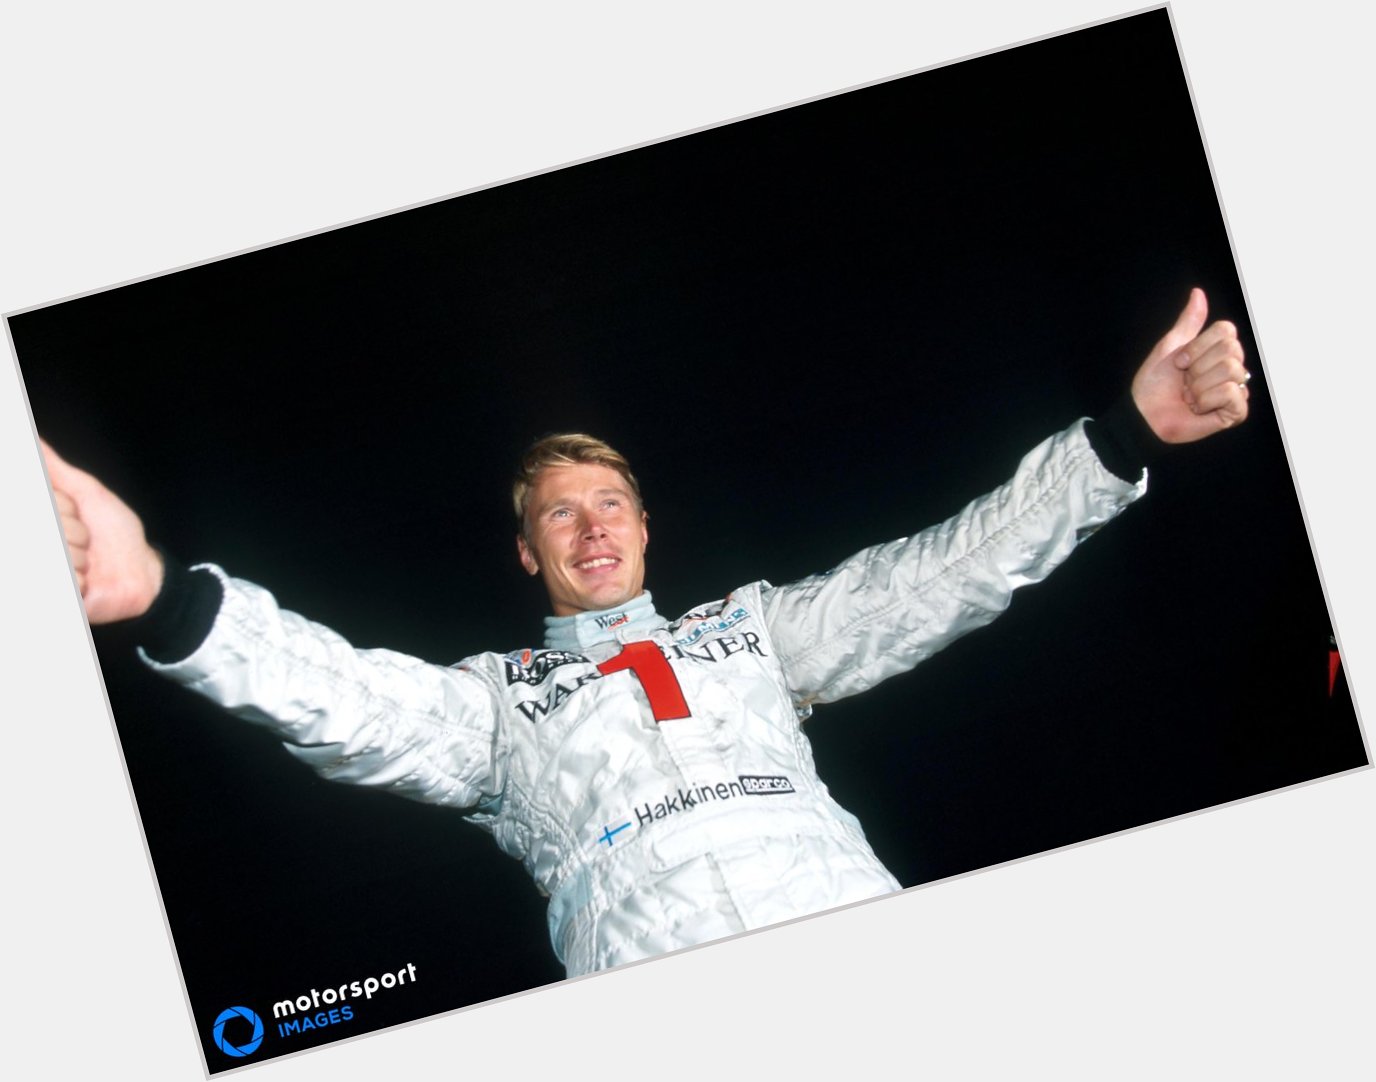 Happy Birthday to double World Champion the Flying Finn Mika Hakkinen, who turns 50 years old today  